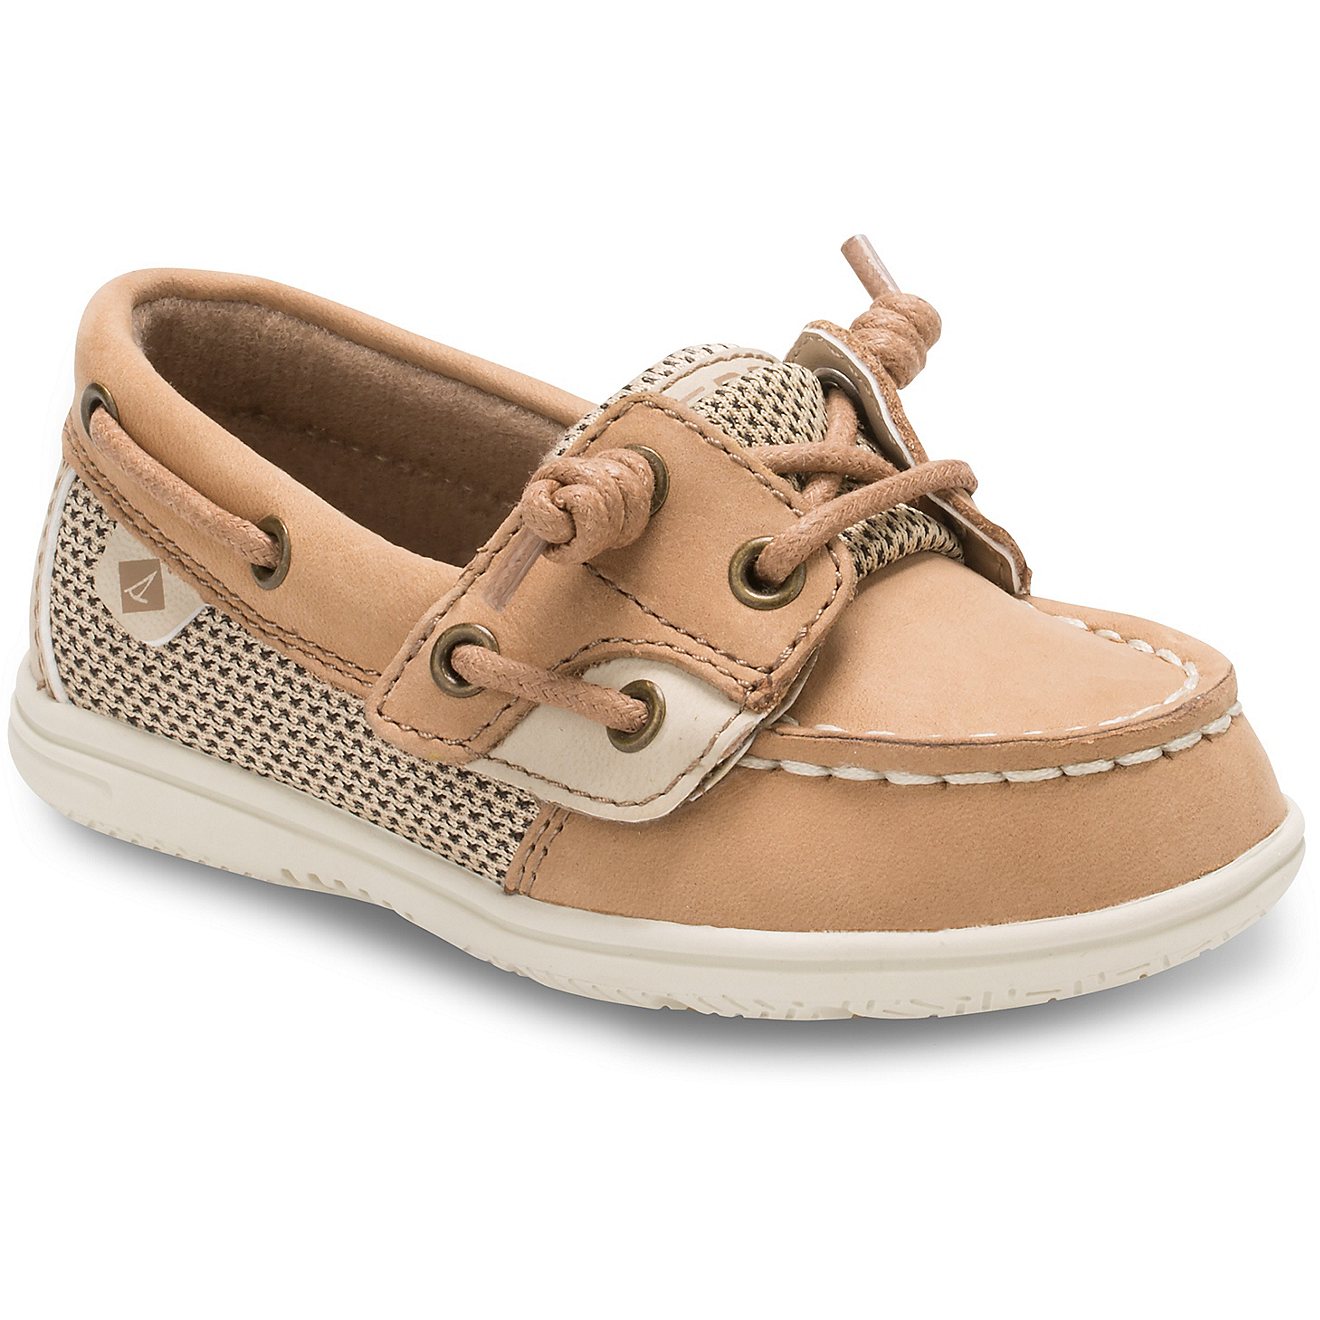 Sperry Toddler Girls' Shoresider Jr Boat Shoes                                                                                   - view number 2